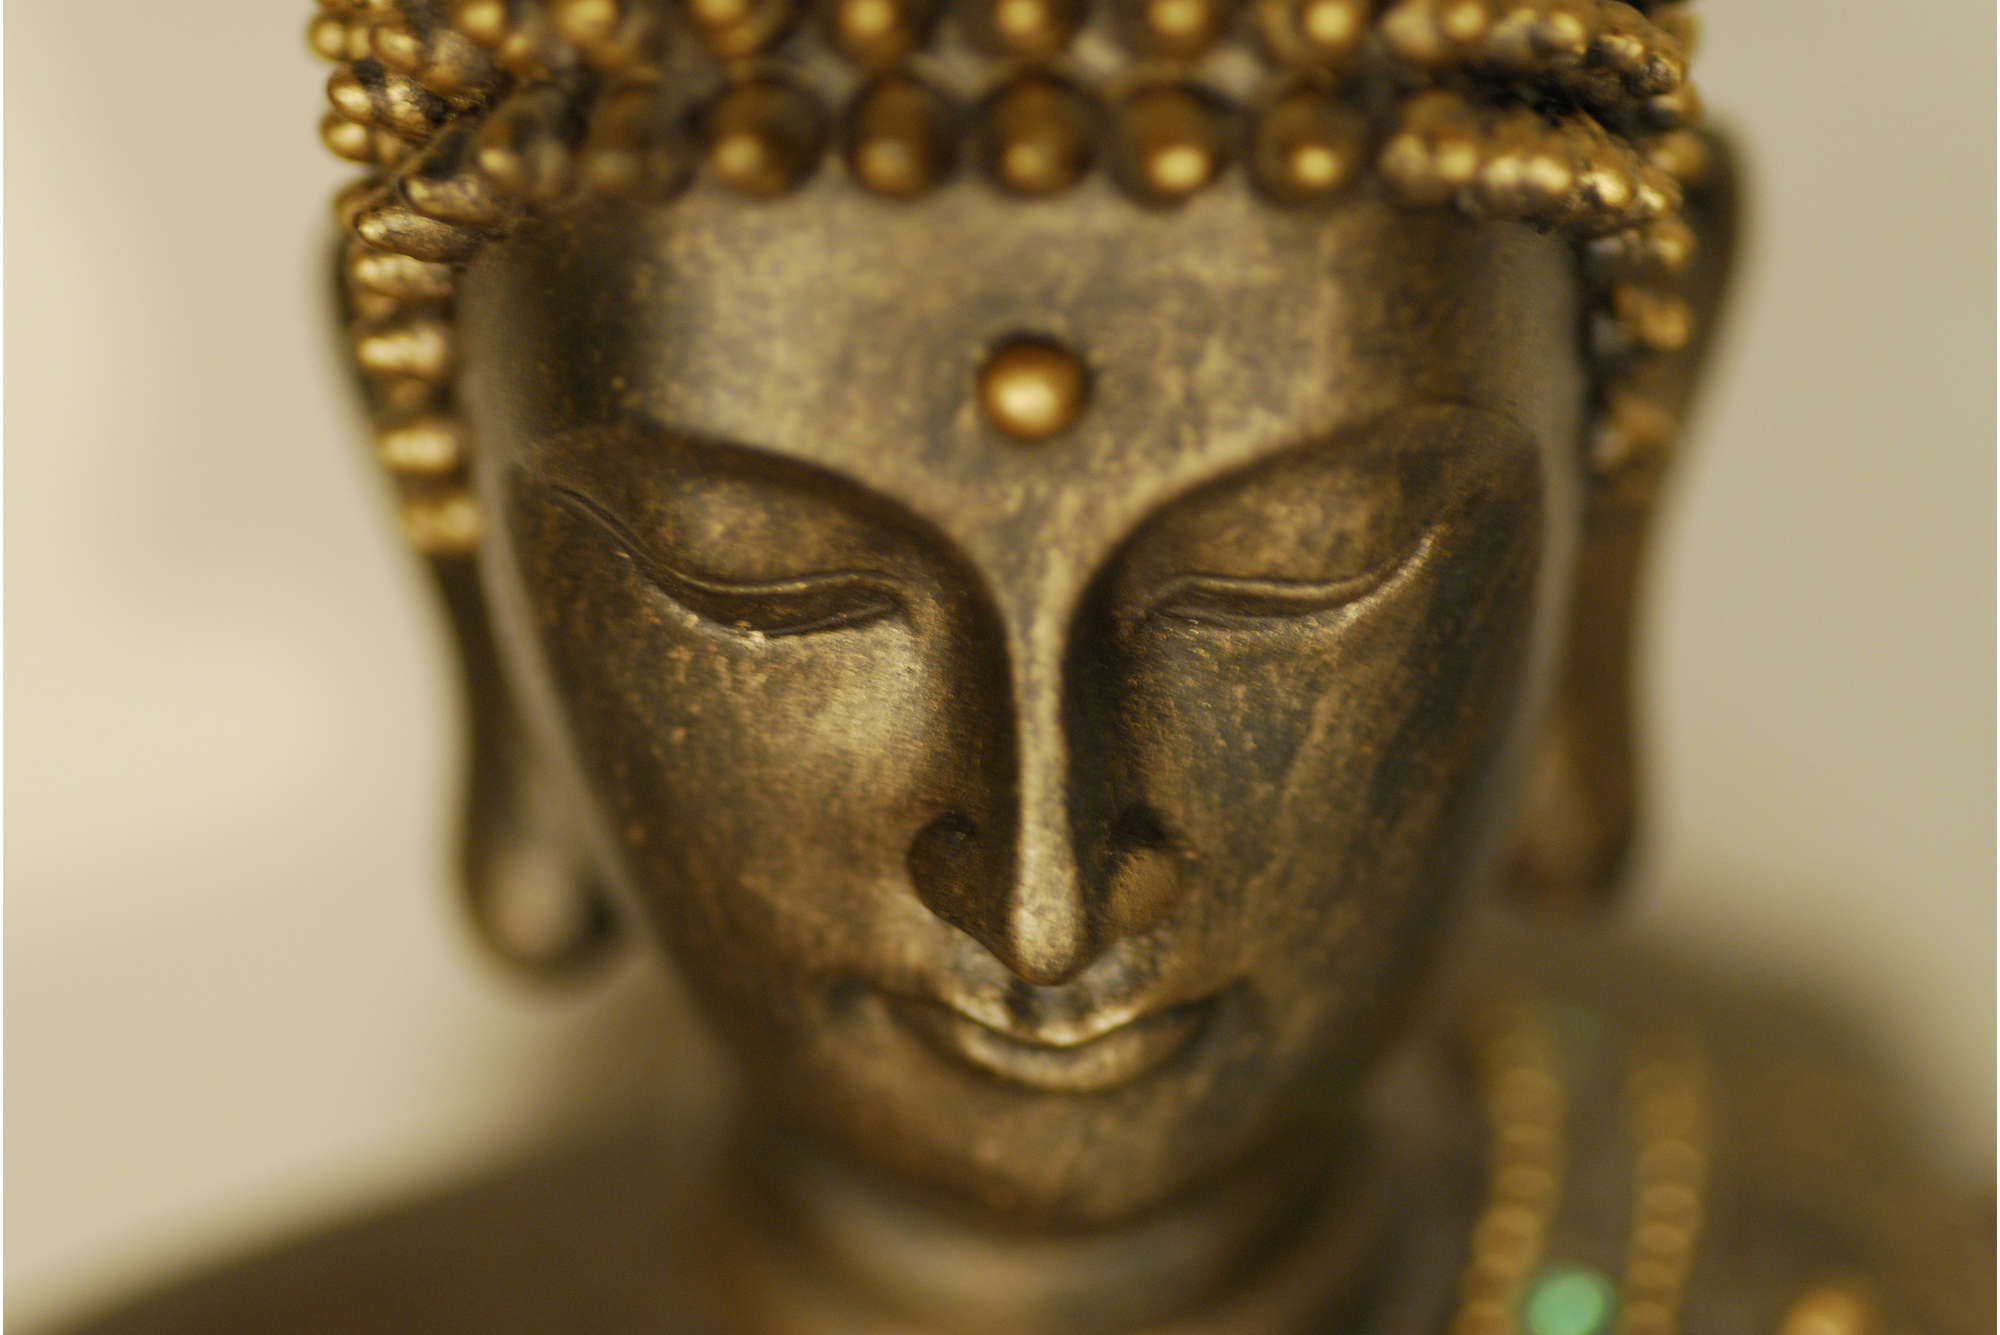             Photo wallpaper close-up of Buddha figure - mother-of-pearl smooth non-woven
        